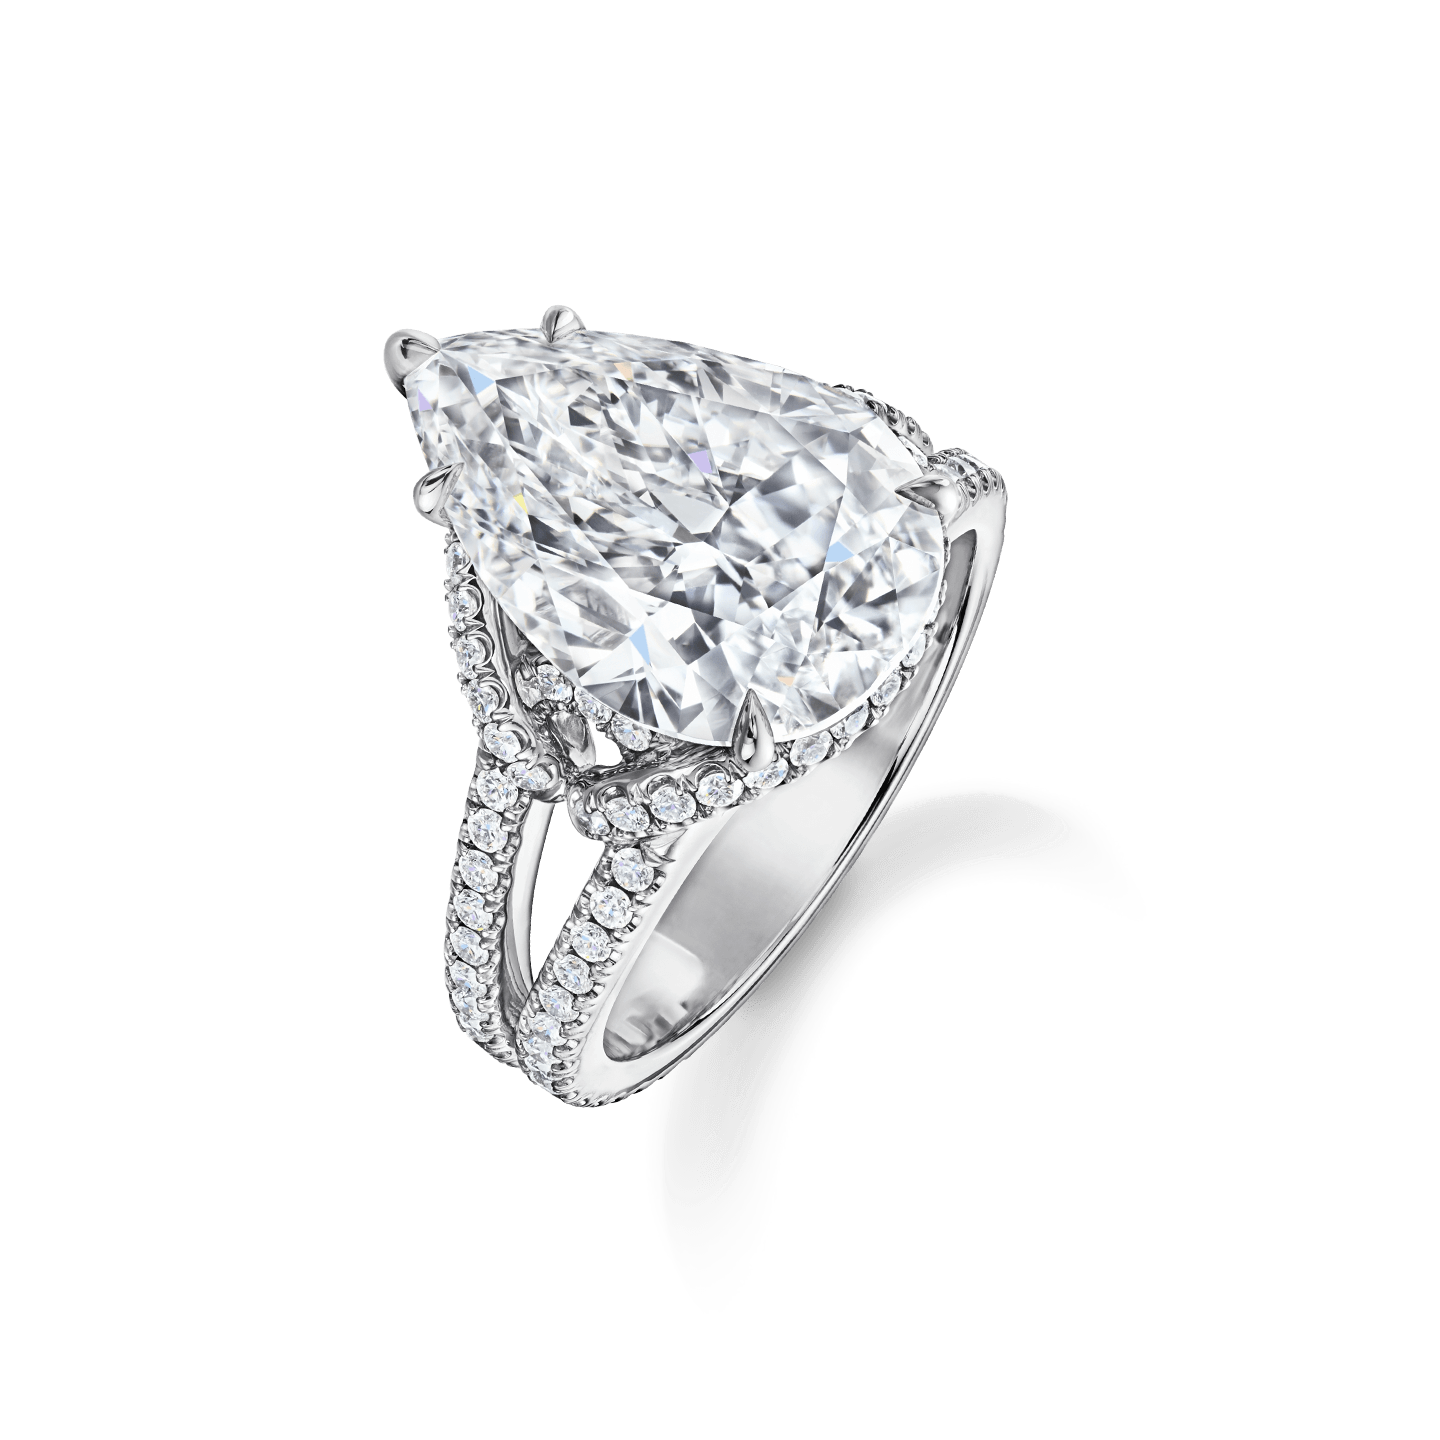 Angled view of the Bridal Couture Pear-Shaped Diamond Engagement Ring